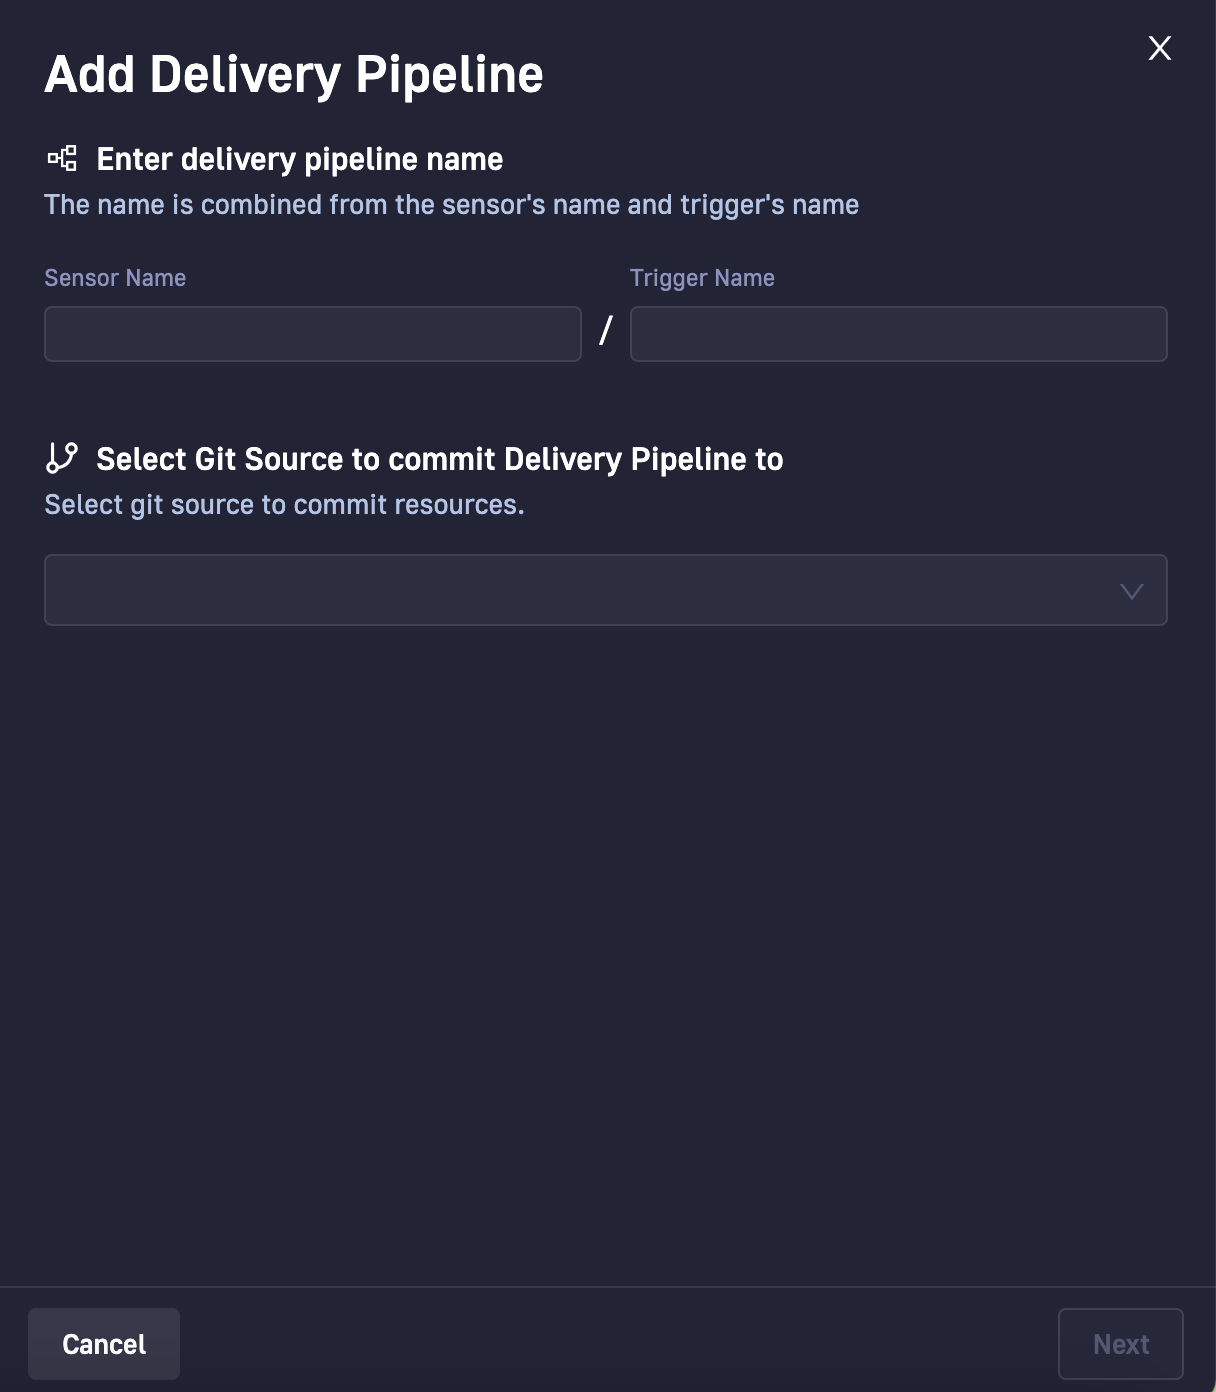 Add Delivery Pipeline panel in Codefresh